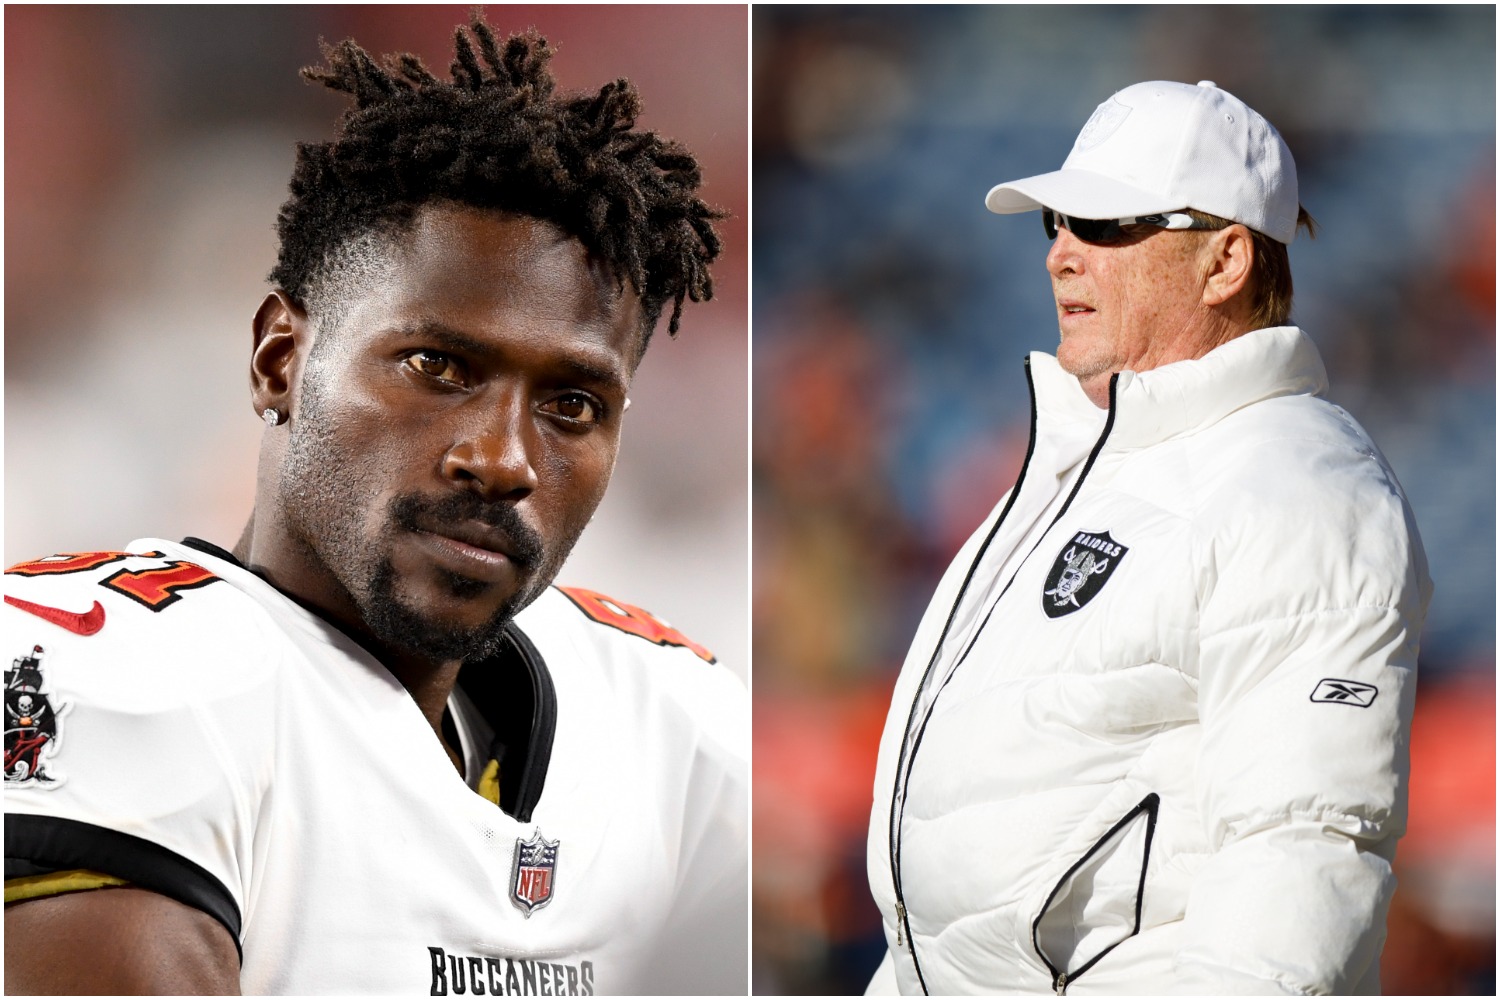 Antonio Brown is Missing $30 Million From His Bank Account Thanks to Raiders Owner Mark Davis